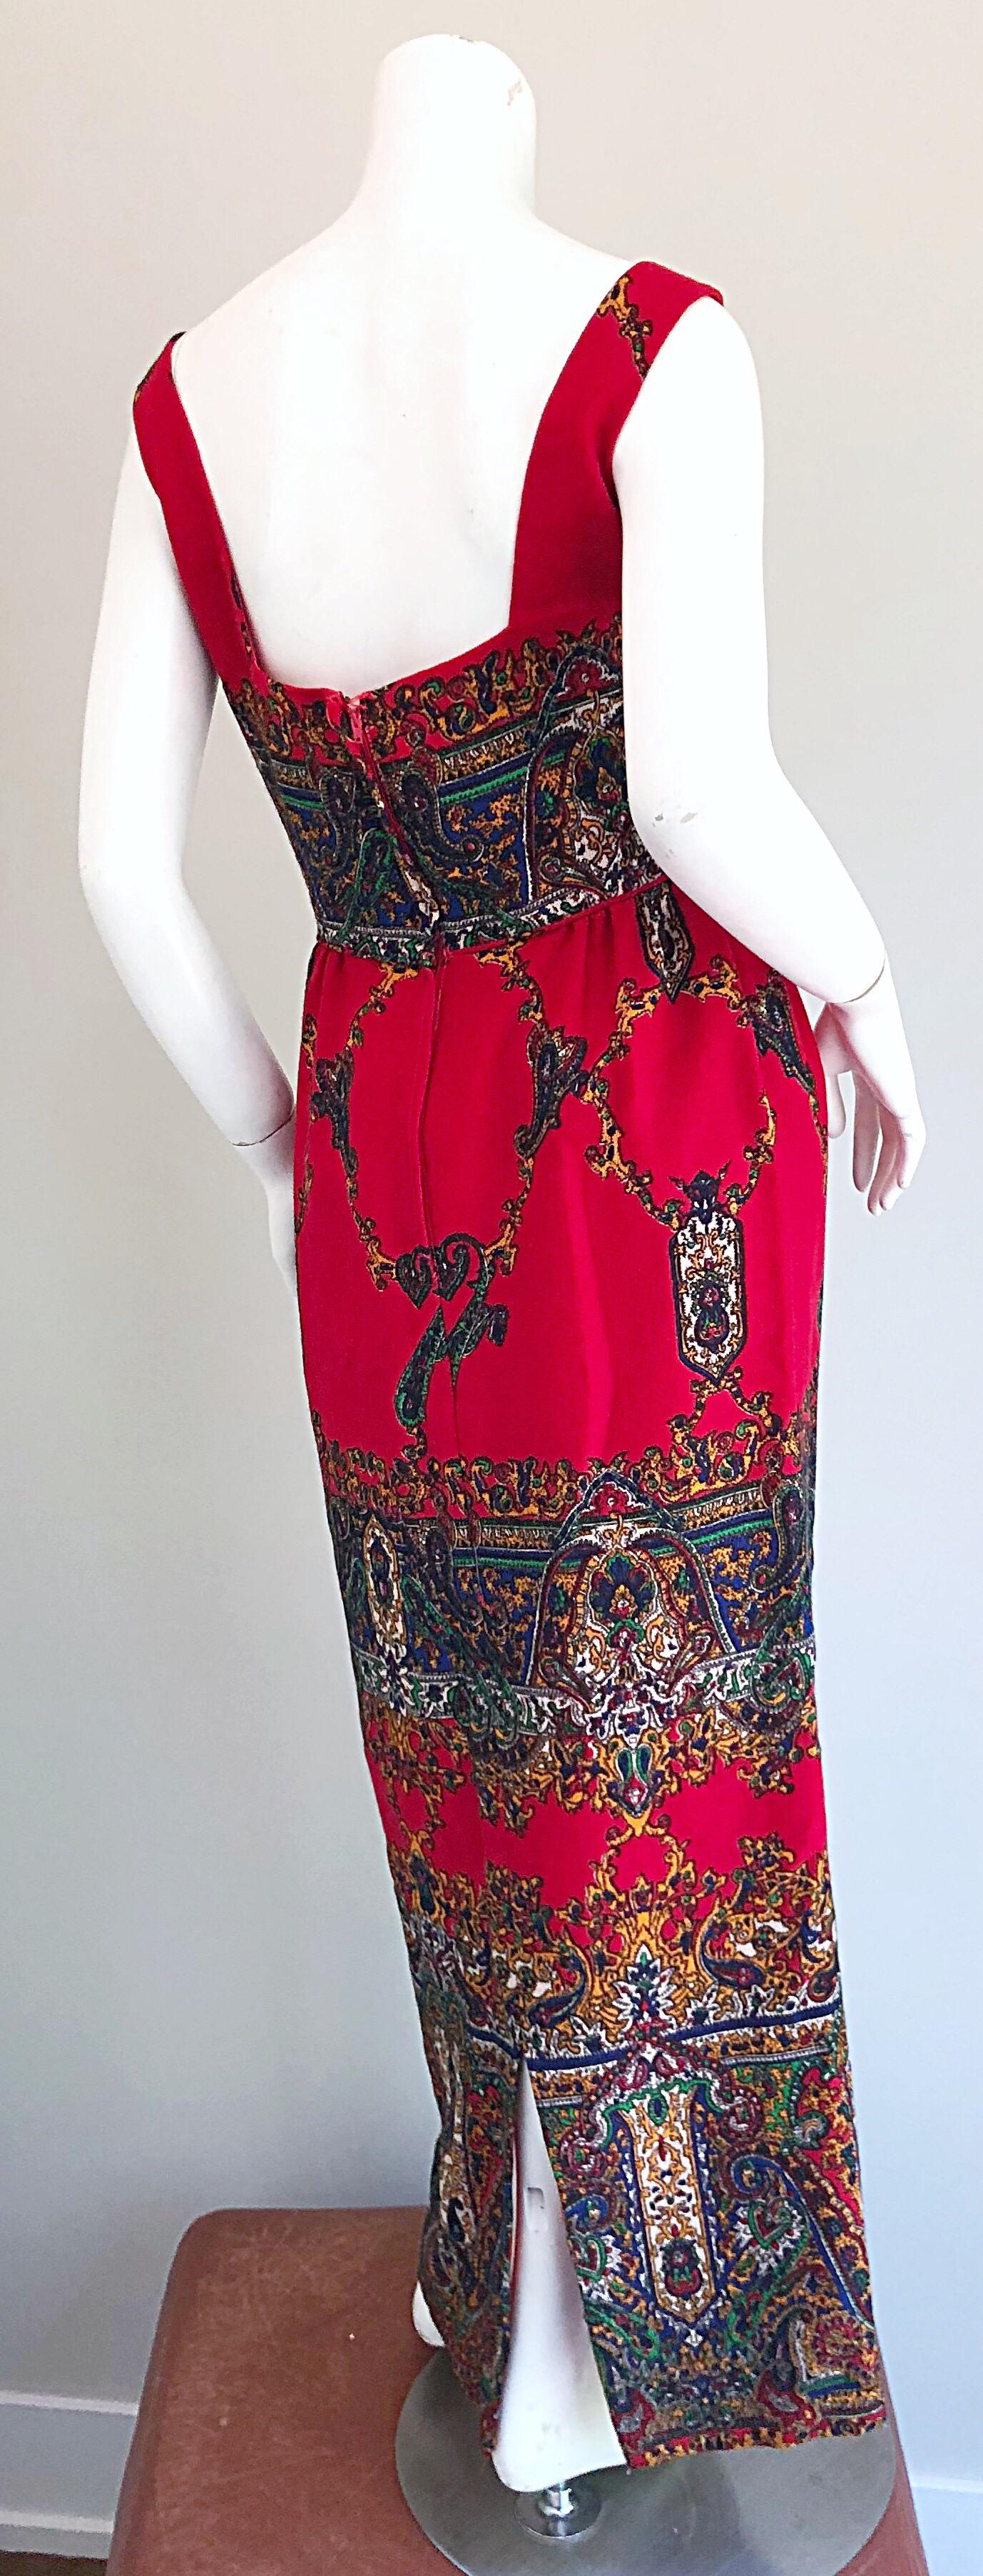 Fantastic Early 1970s Boho Chic Paisley Print Vintage Red 70s Maxi Dress For Sale 2